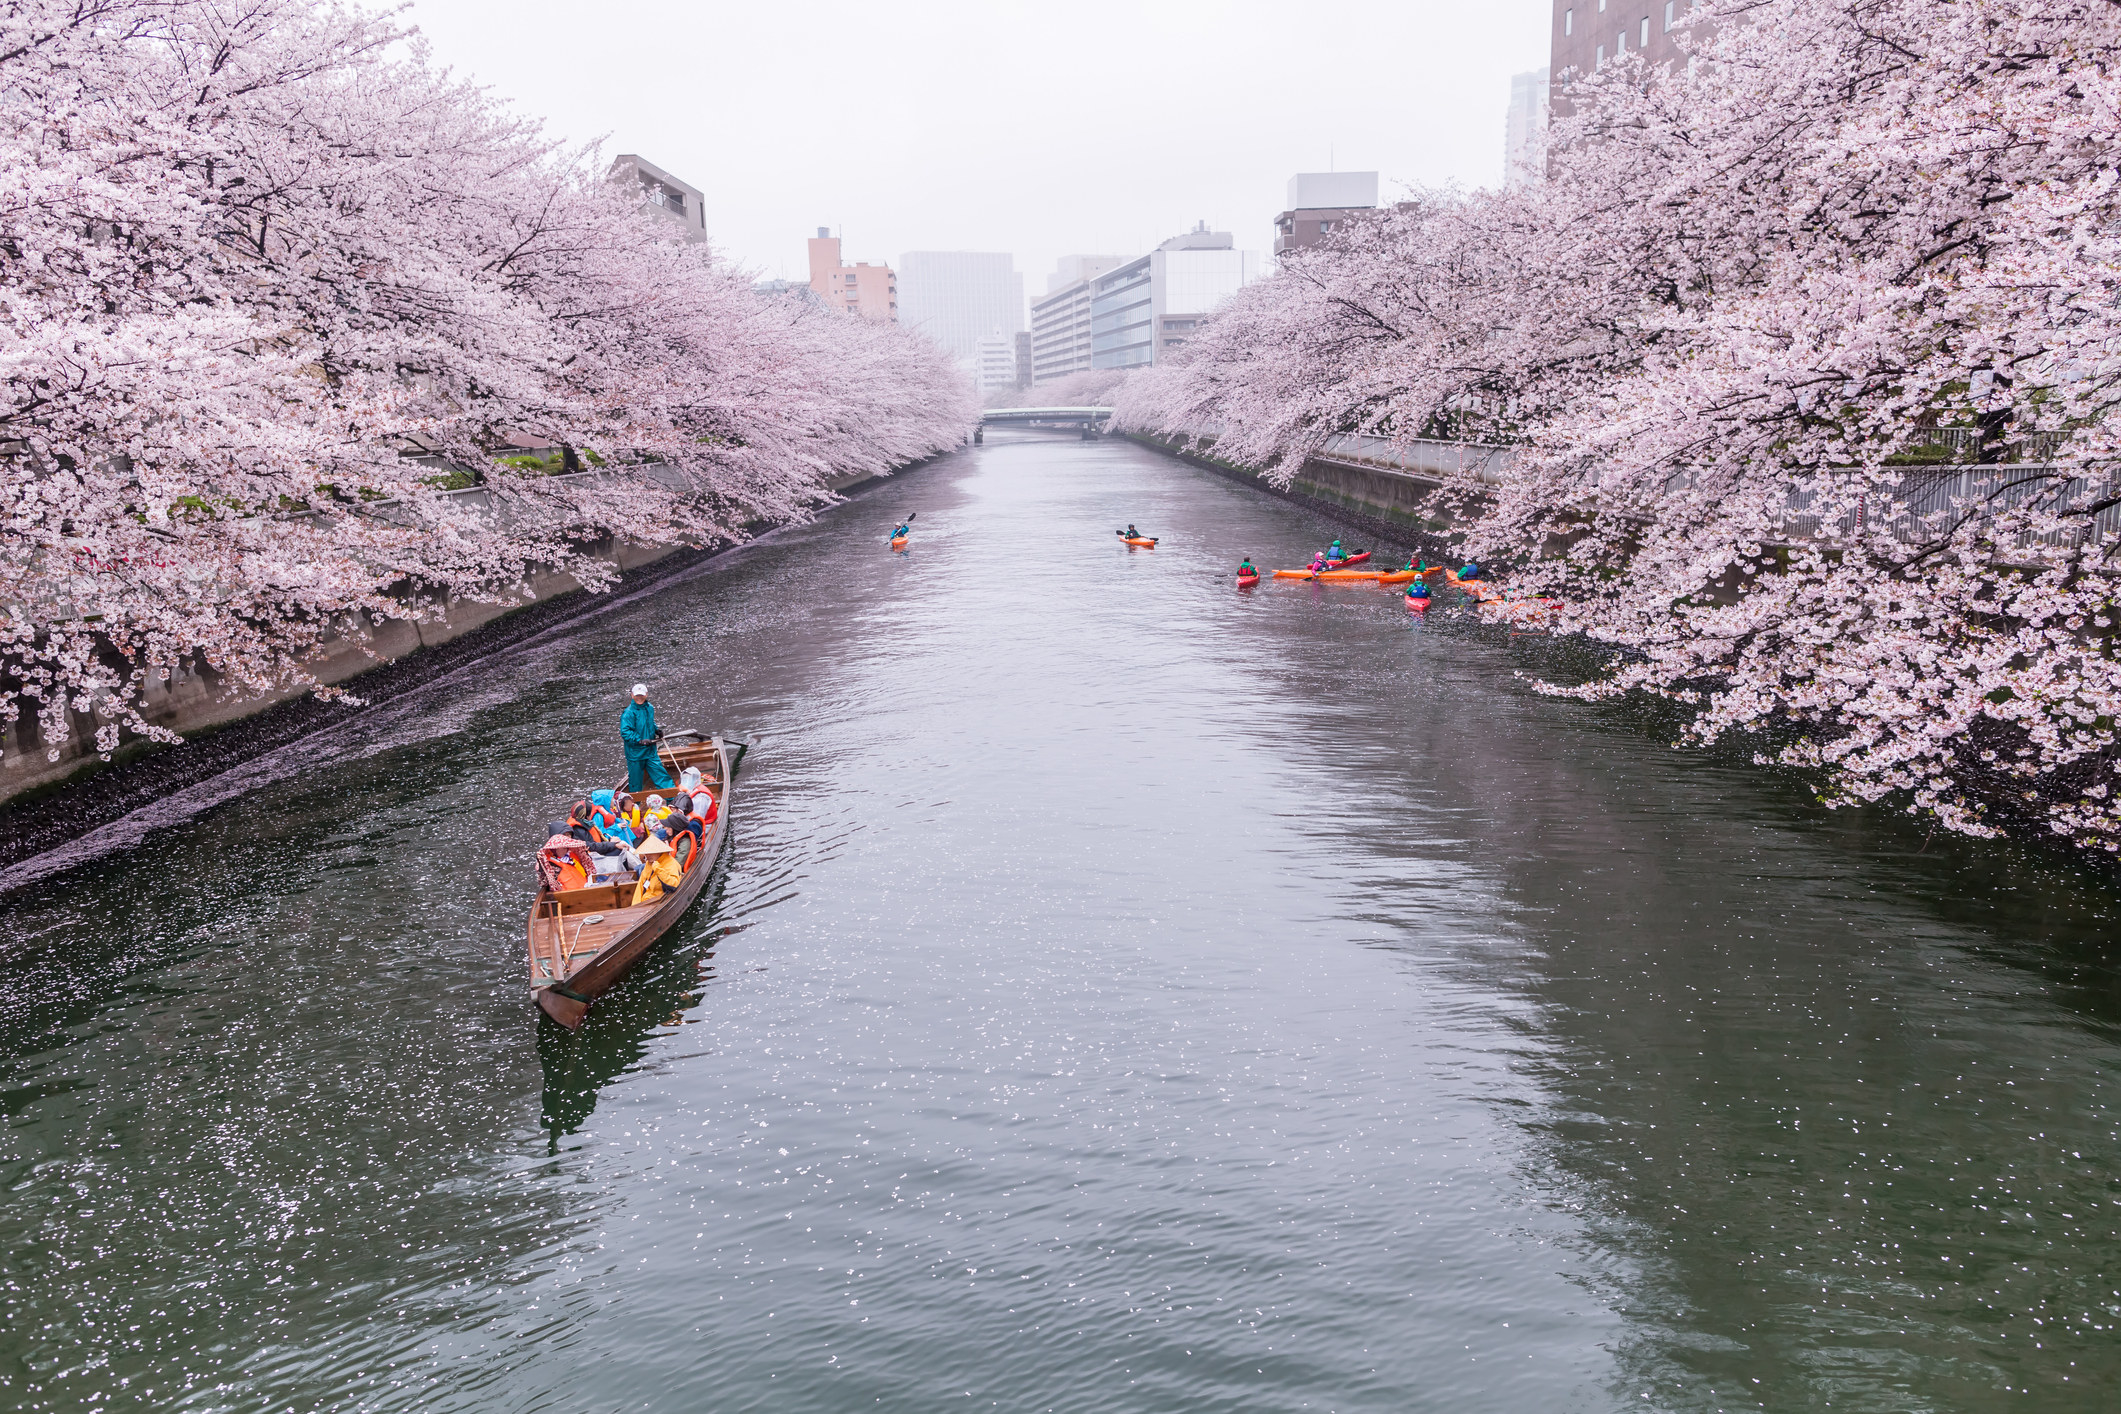 Tourists in a boat on the Sumida River in Tokyo